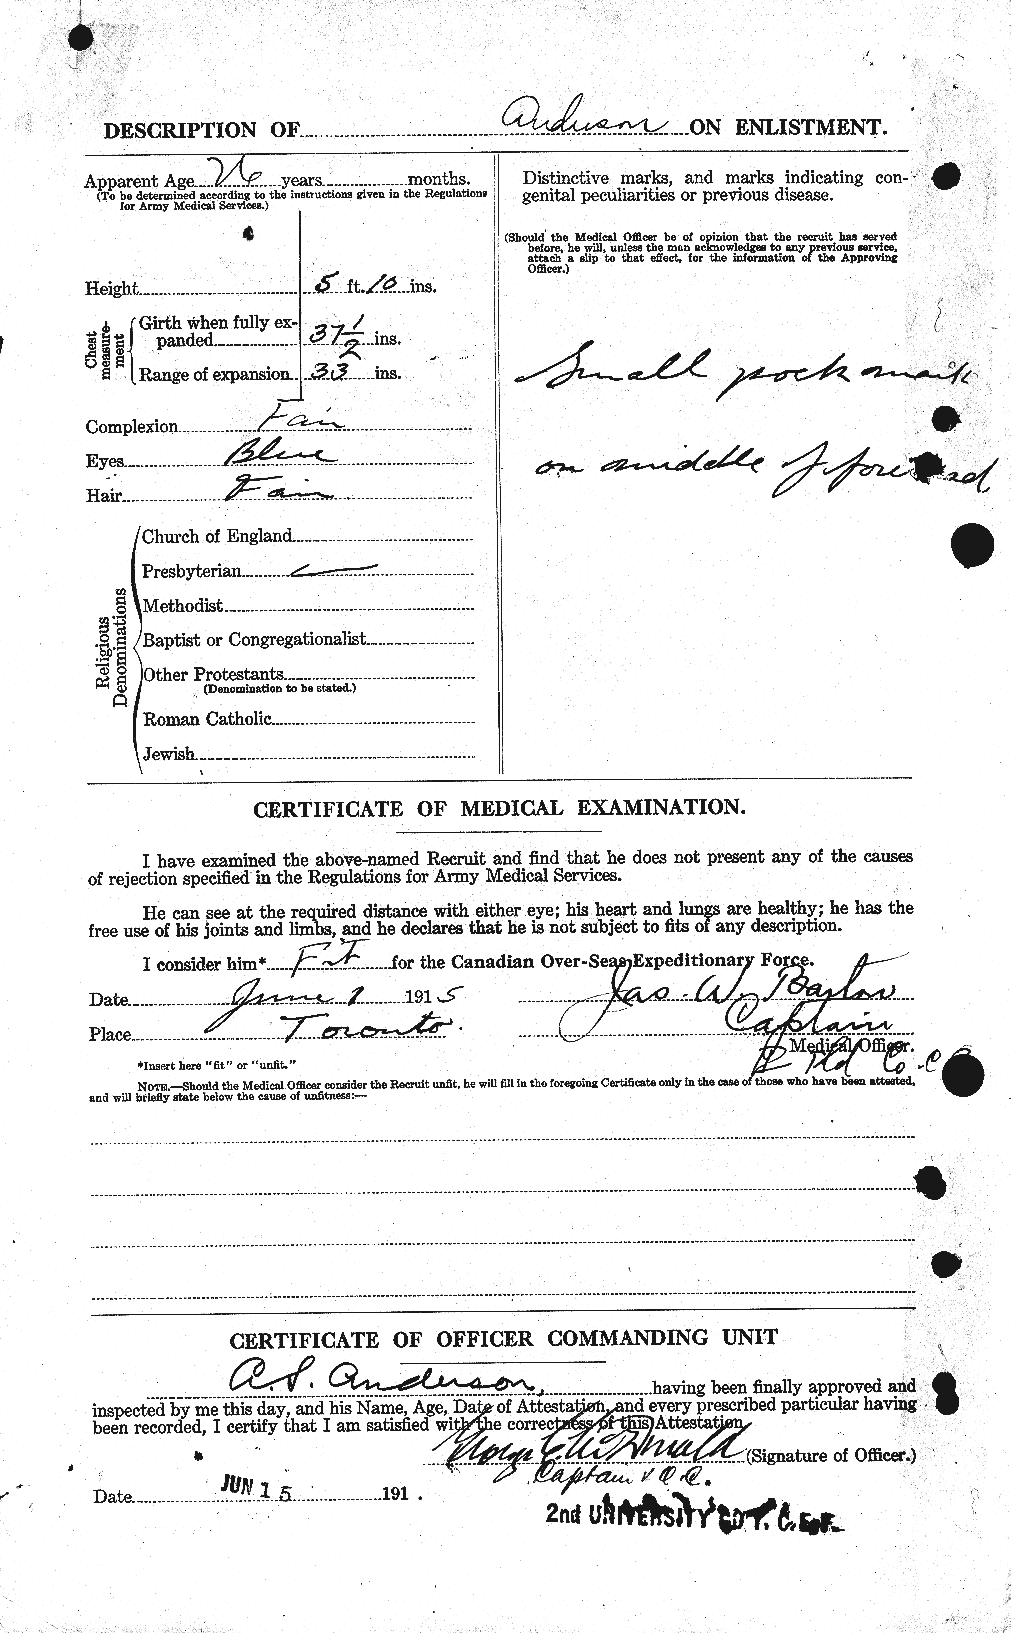 Personnel Records of the First World War - CEF 209349b